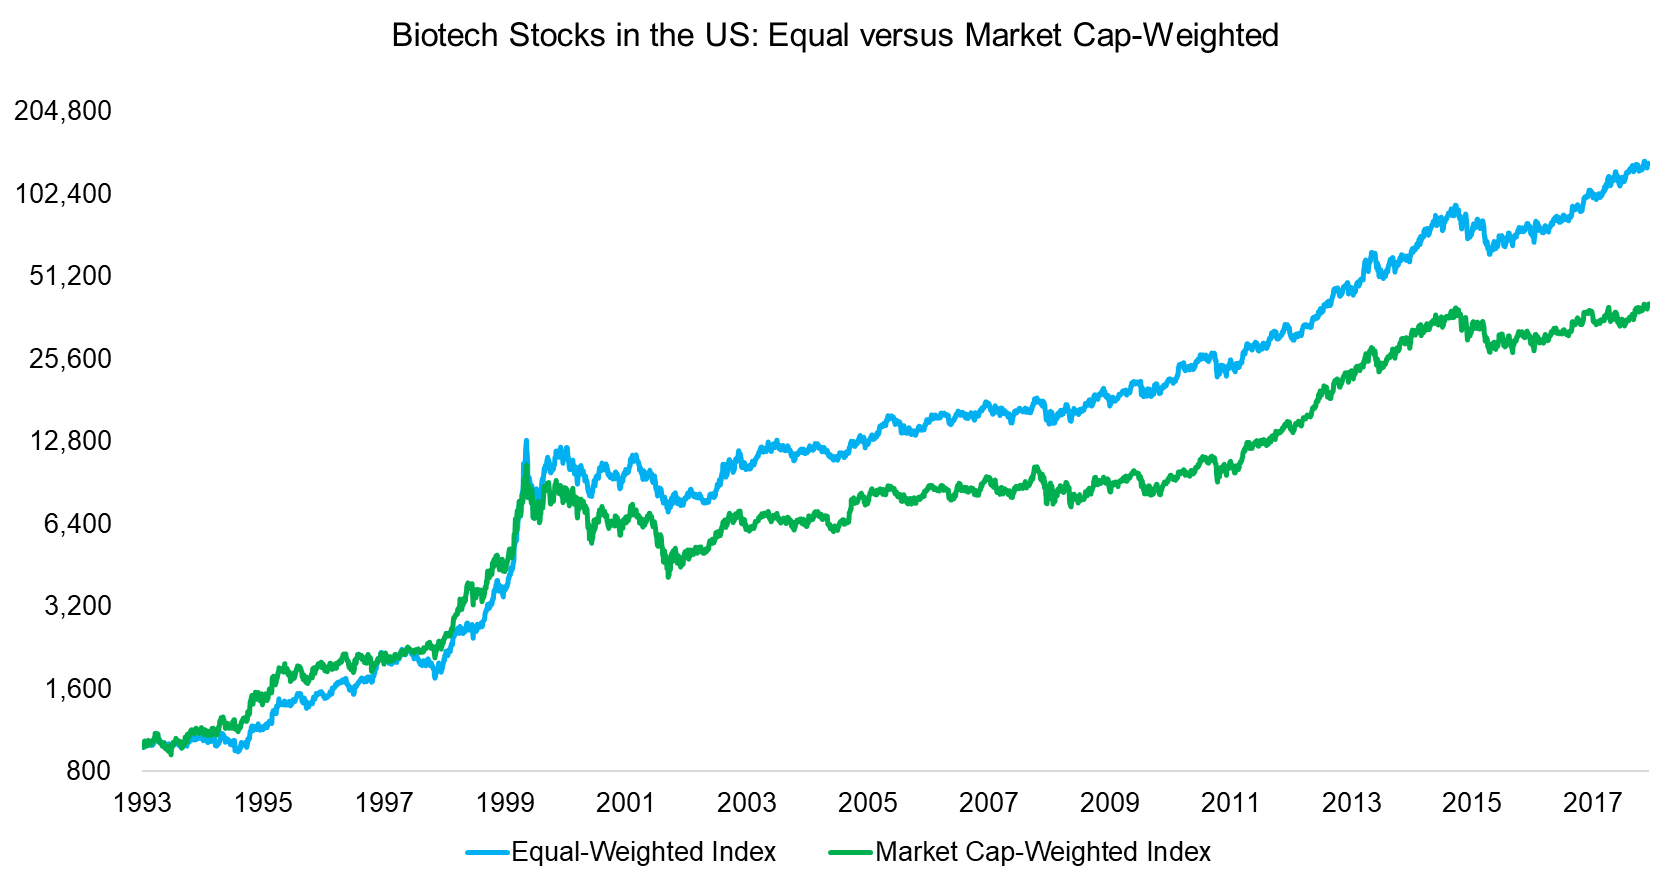 Biotech Stocks in the US Equal versus Market Cap-Weighted